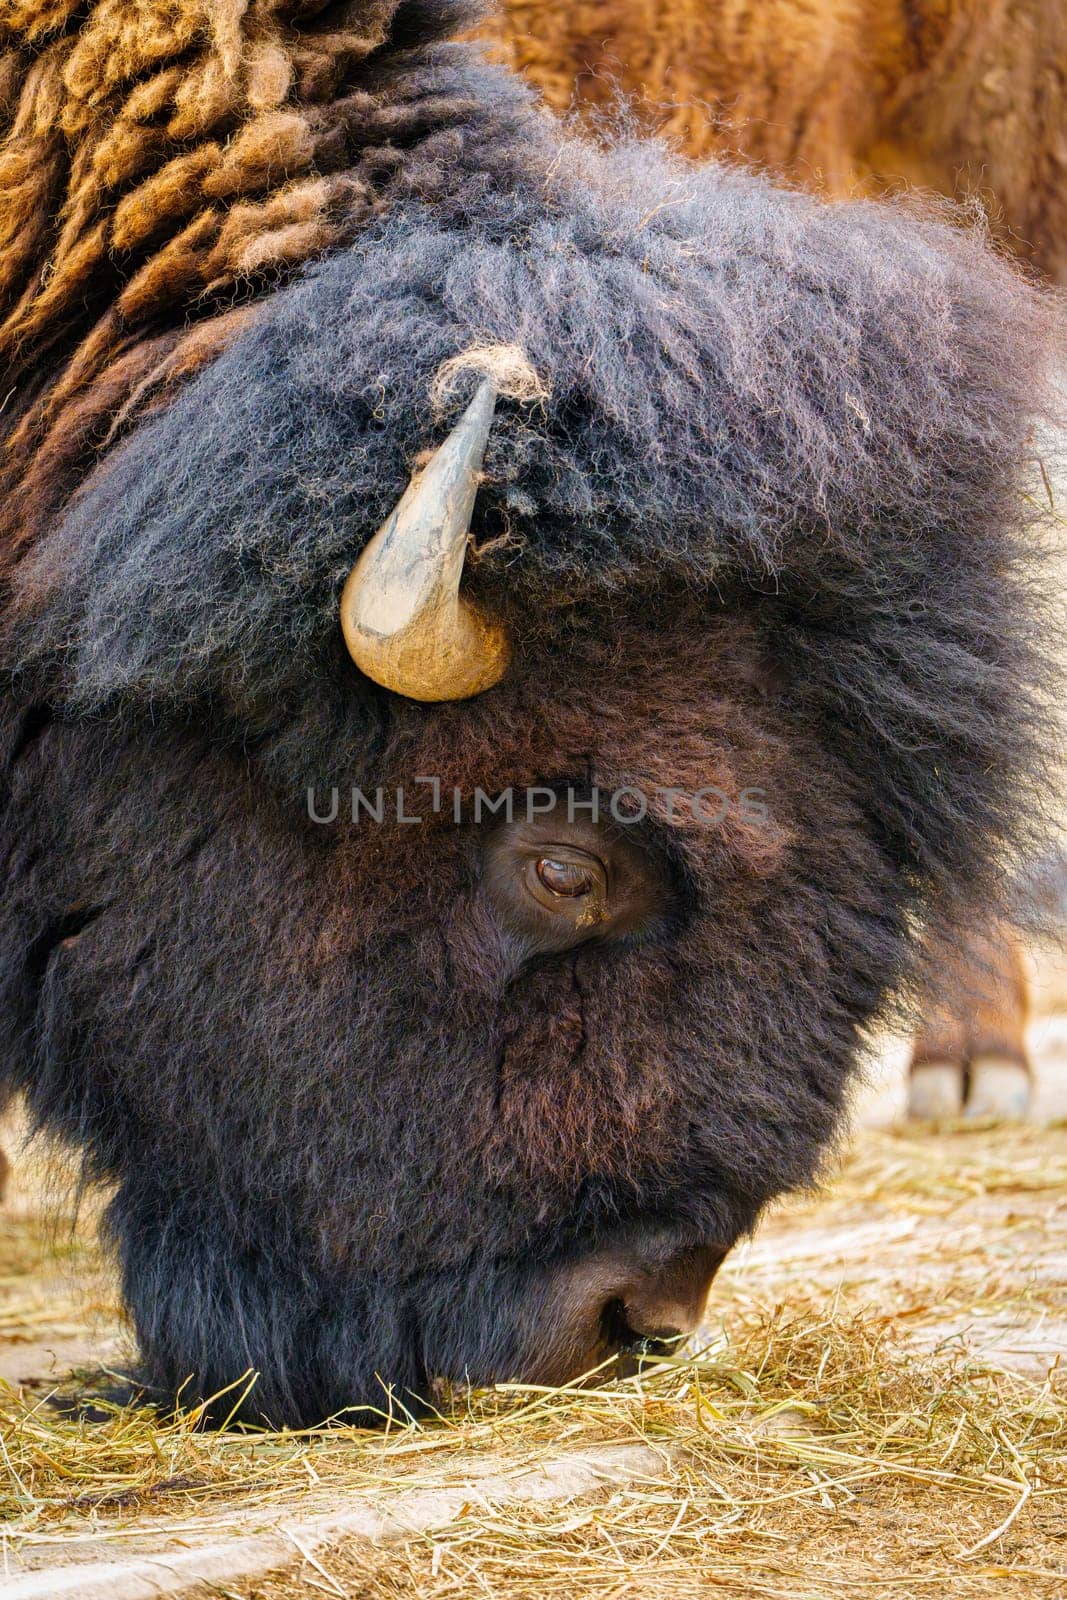 Close-up portrait of a bison grazing on dry grass in a wildlife nature setting. The majestic animal is captured in a natural and raw environment, highlighting the beauty of wildlife.